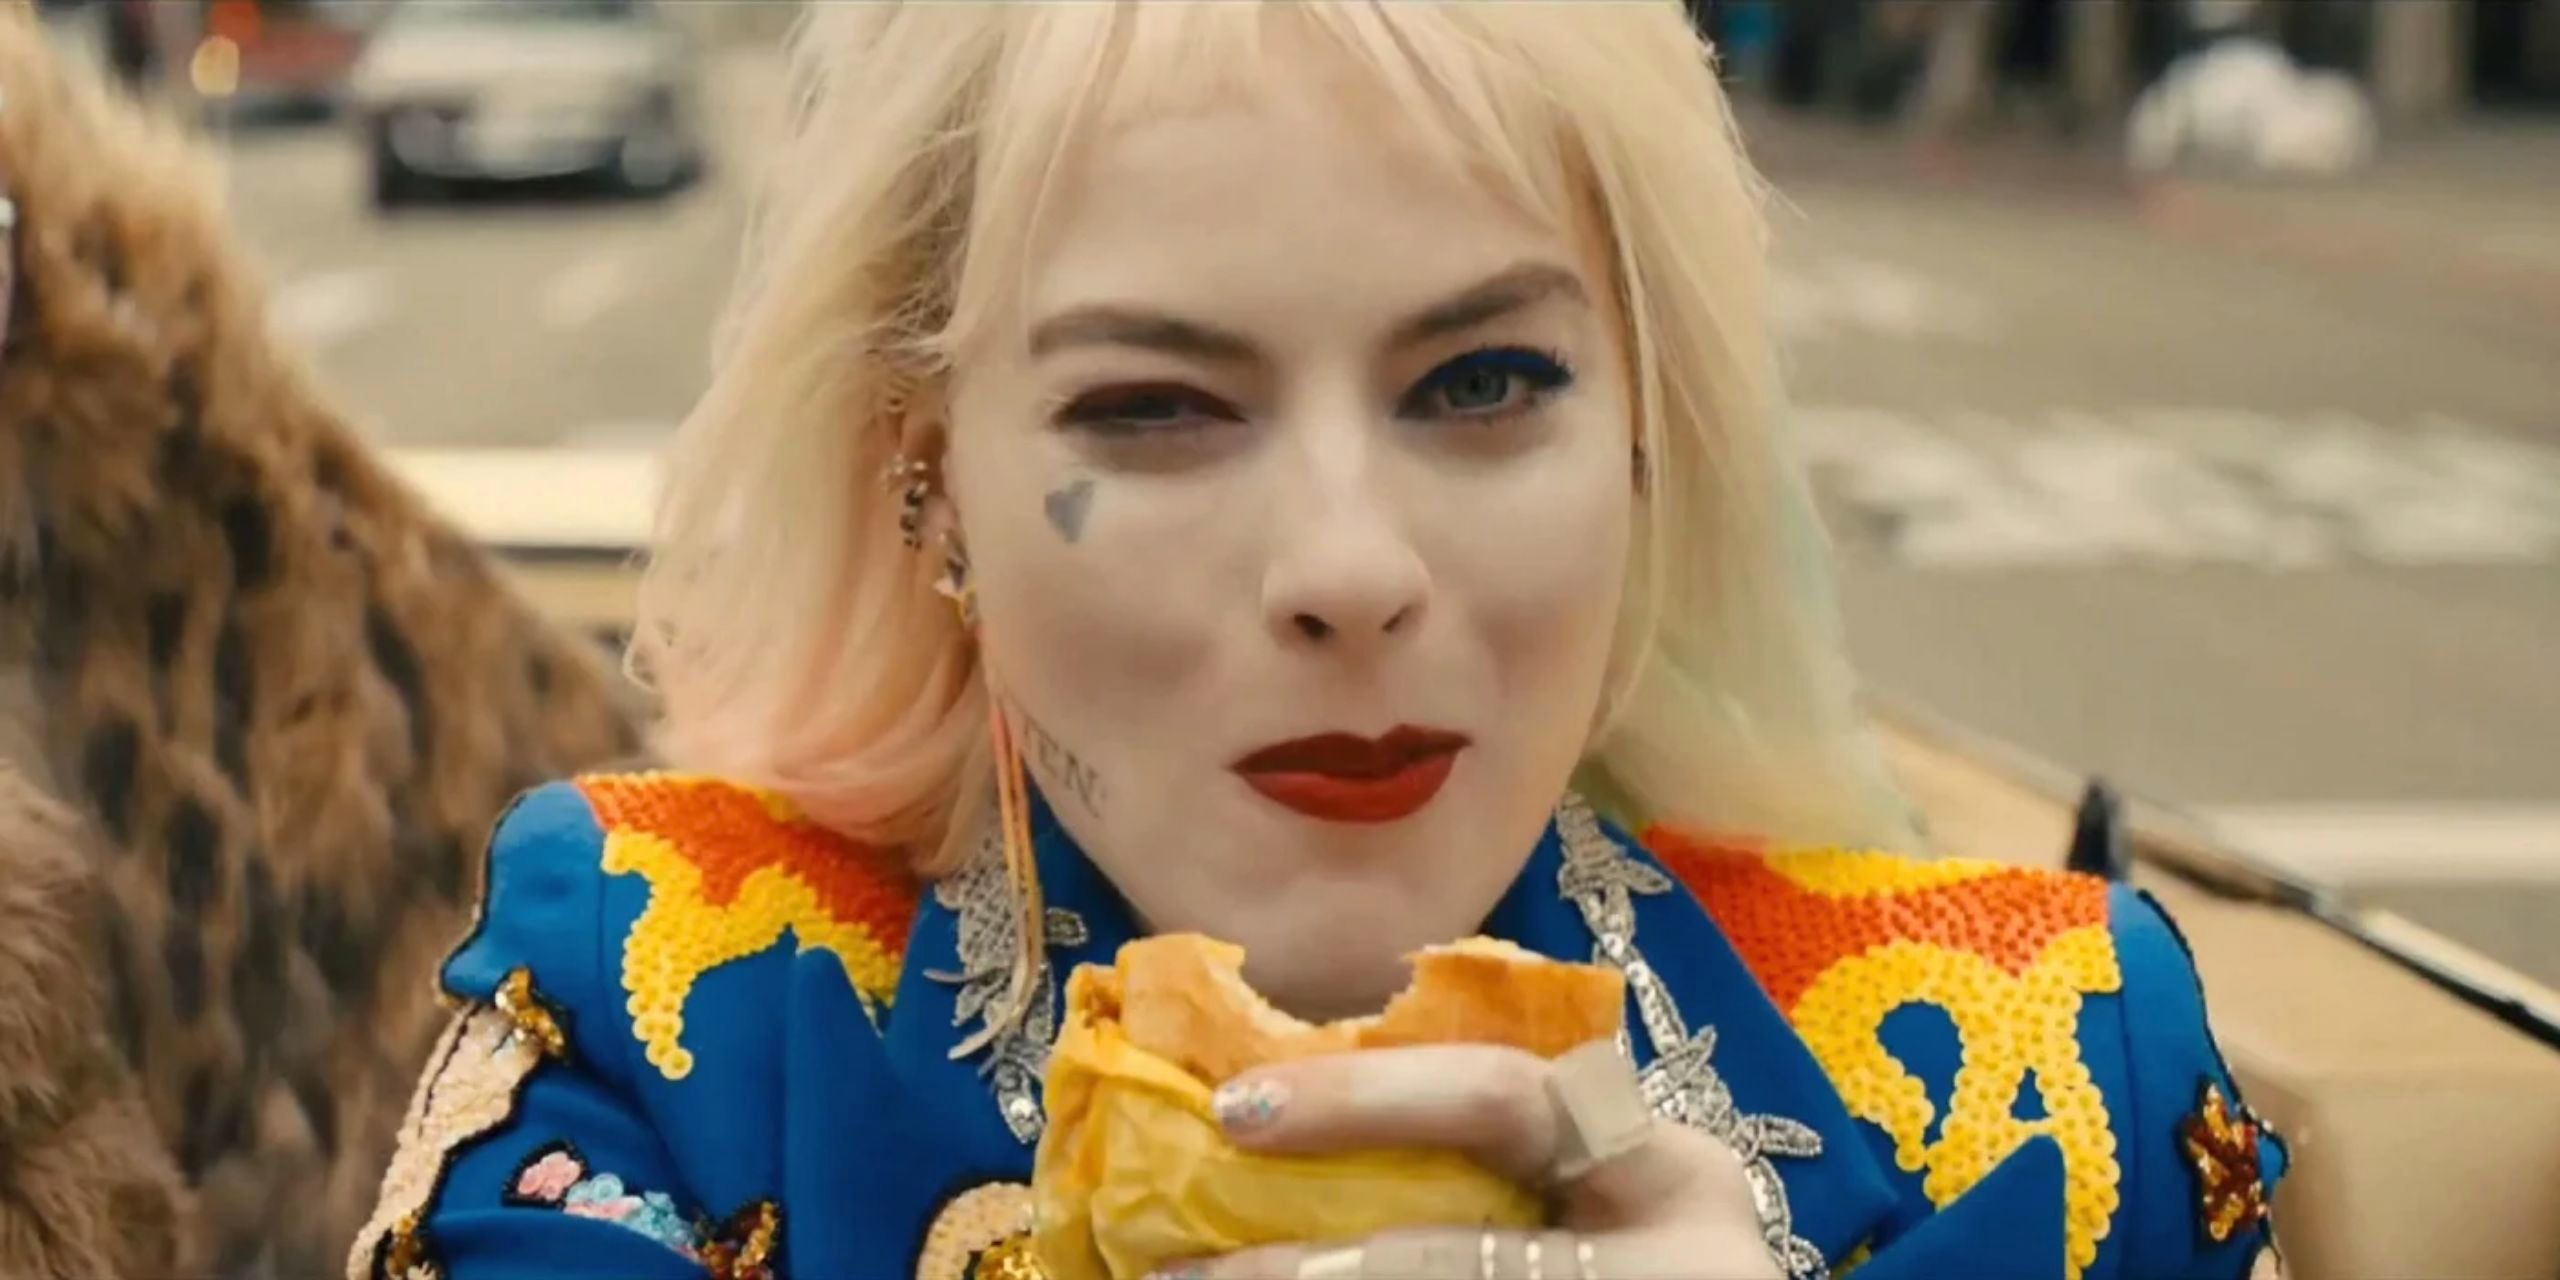 Harley Quinn and her sandwich in Birds of Prey